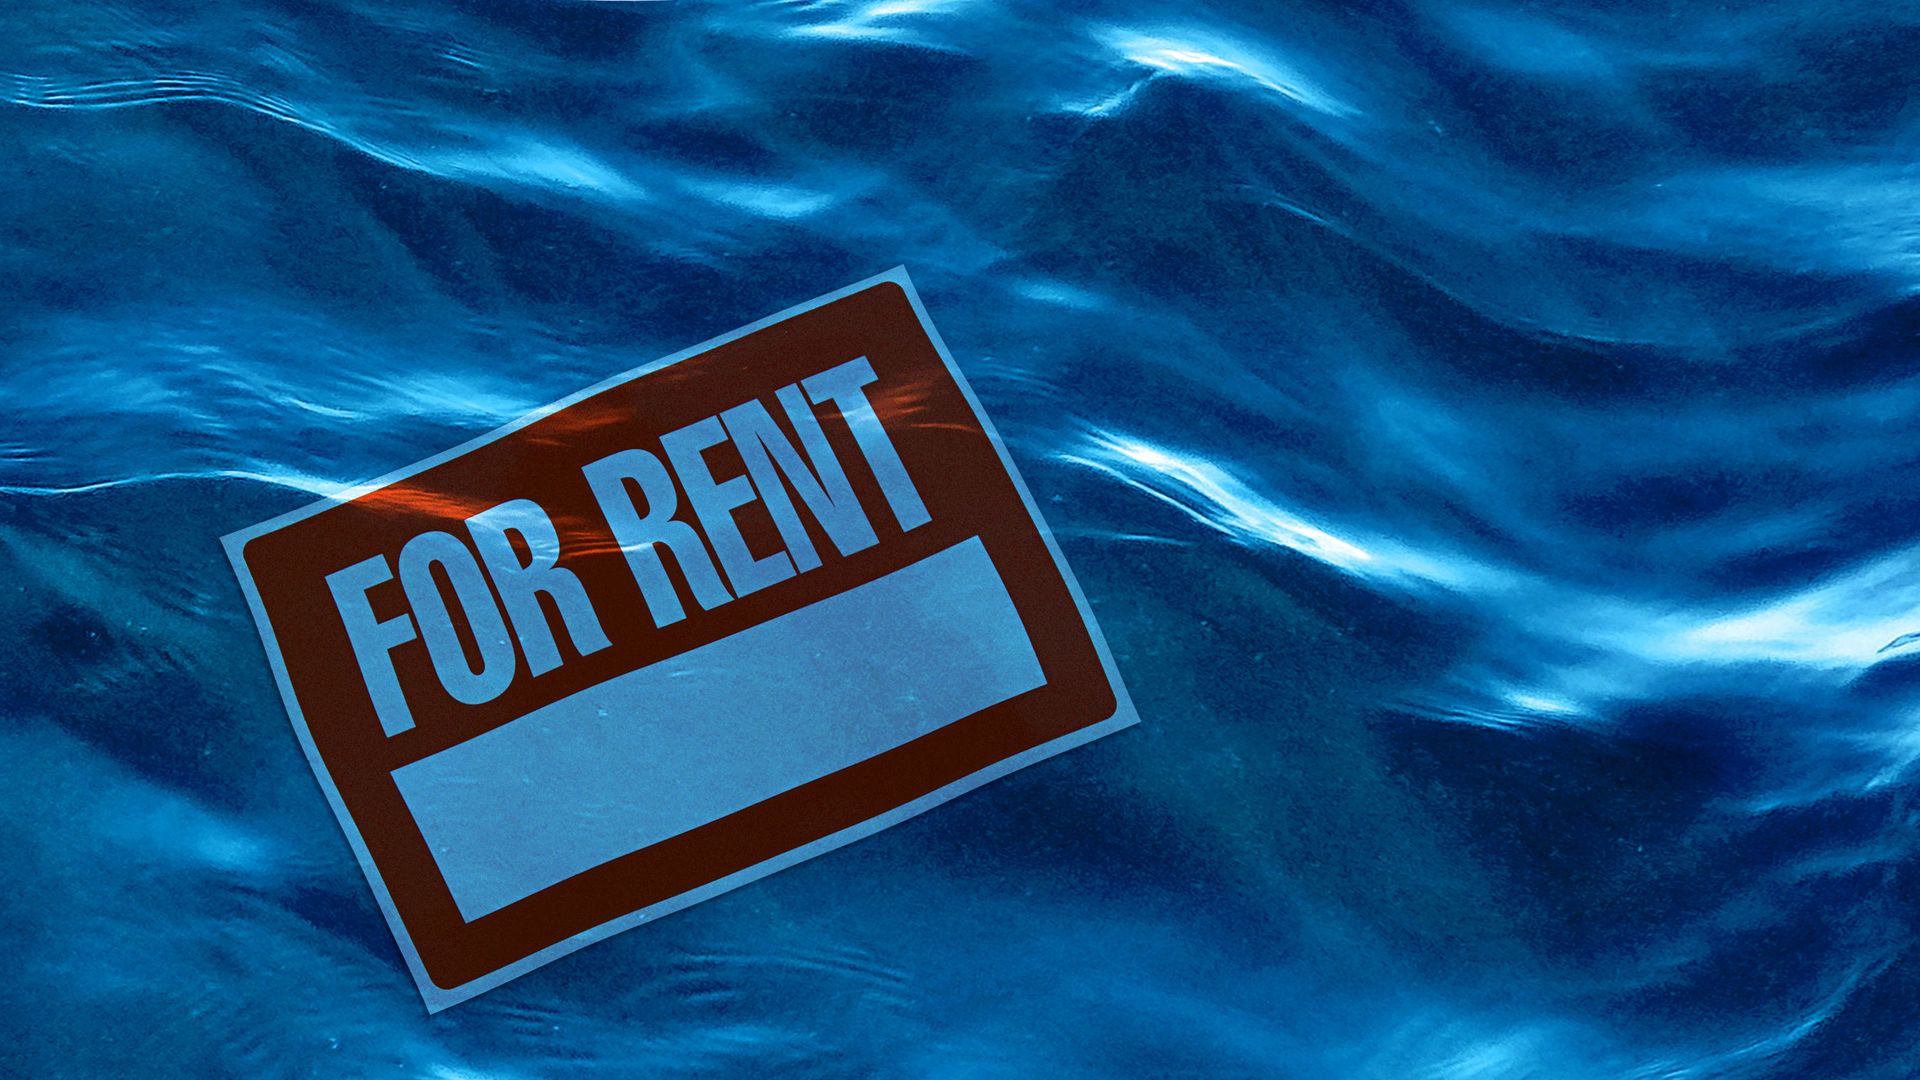 Illustration of a "For Rent" sign under water. 